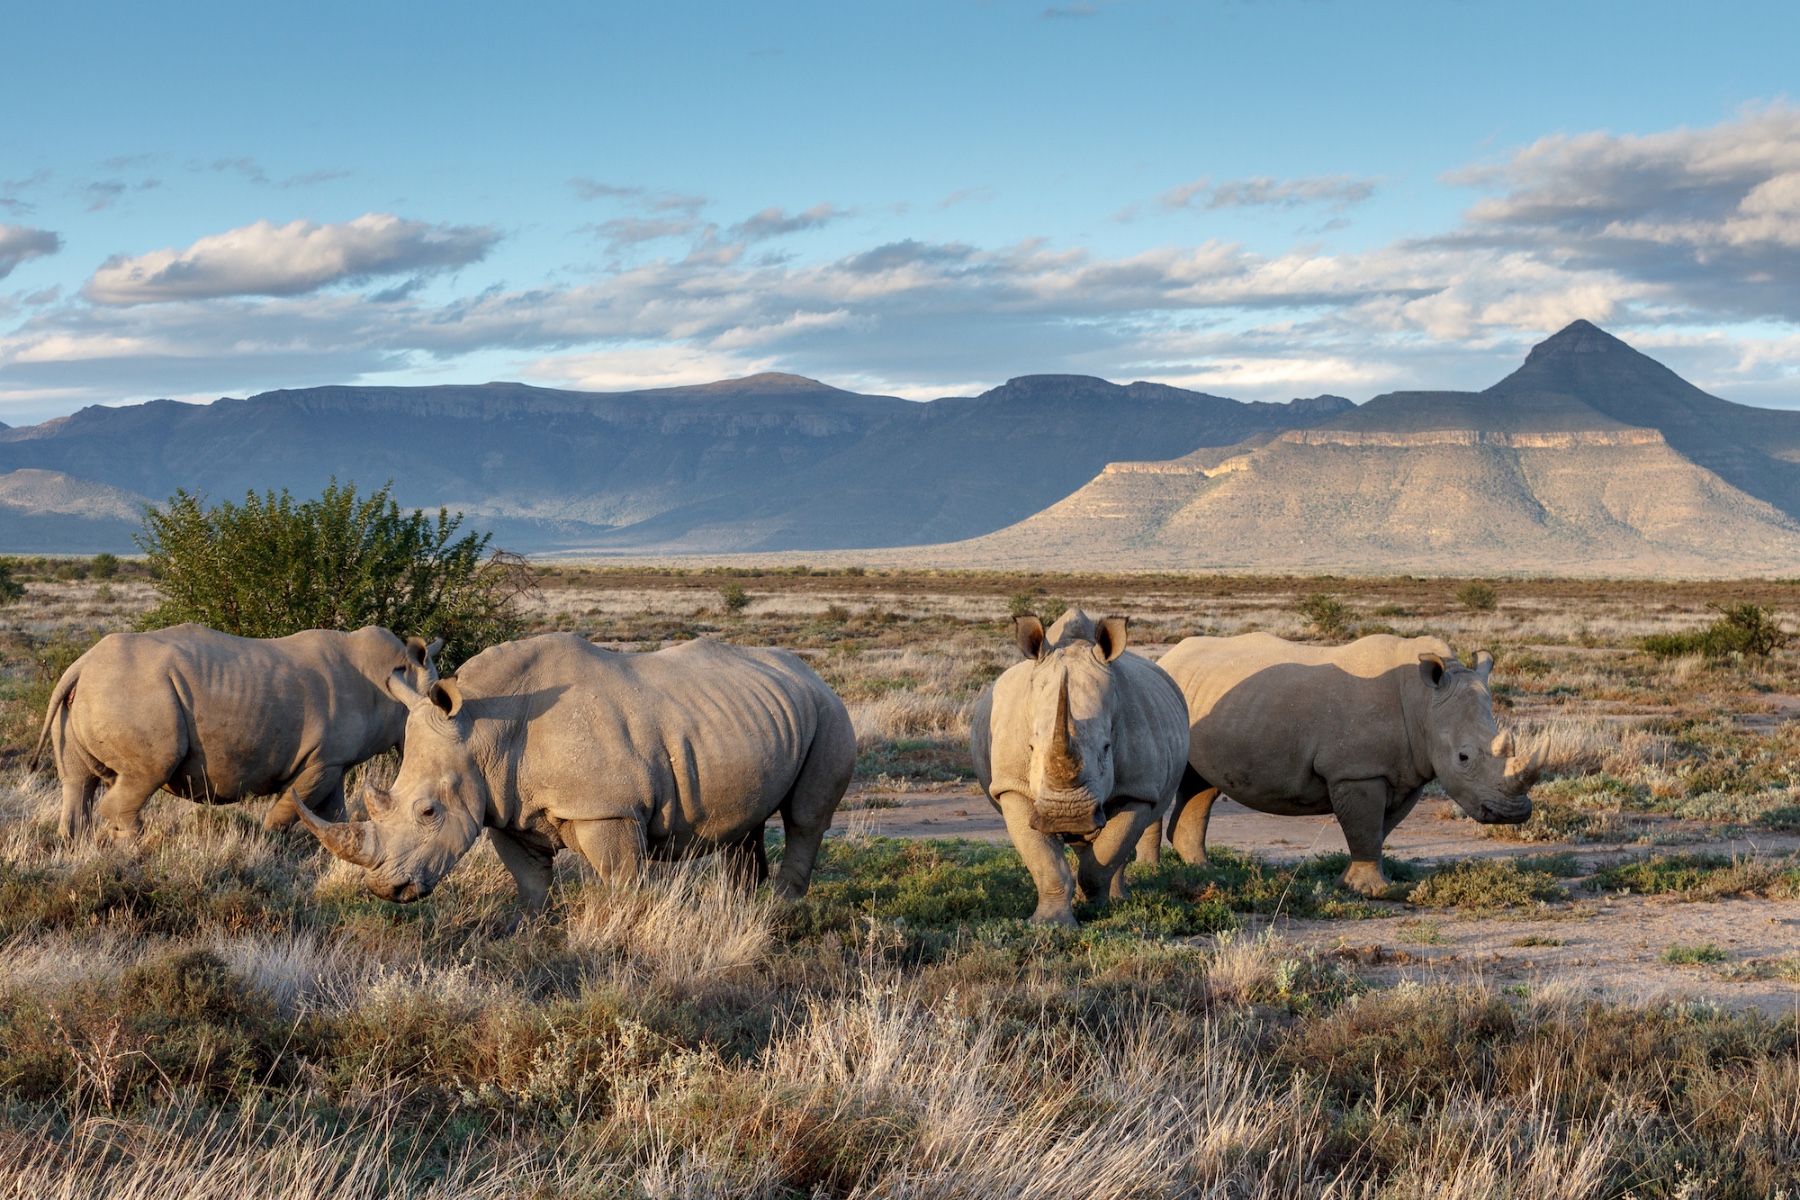 White rhinos in the great karoo, Africa, conservation travel journeys with purpose